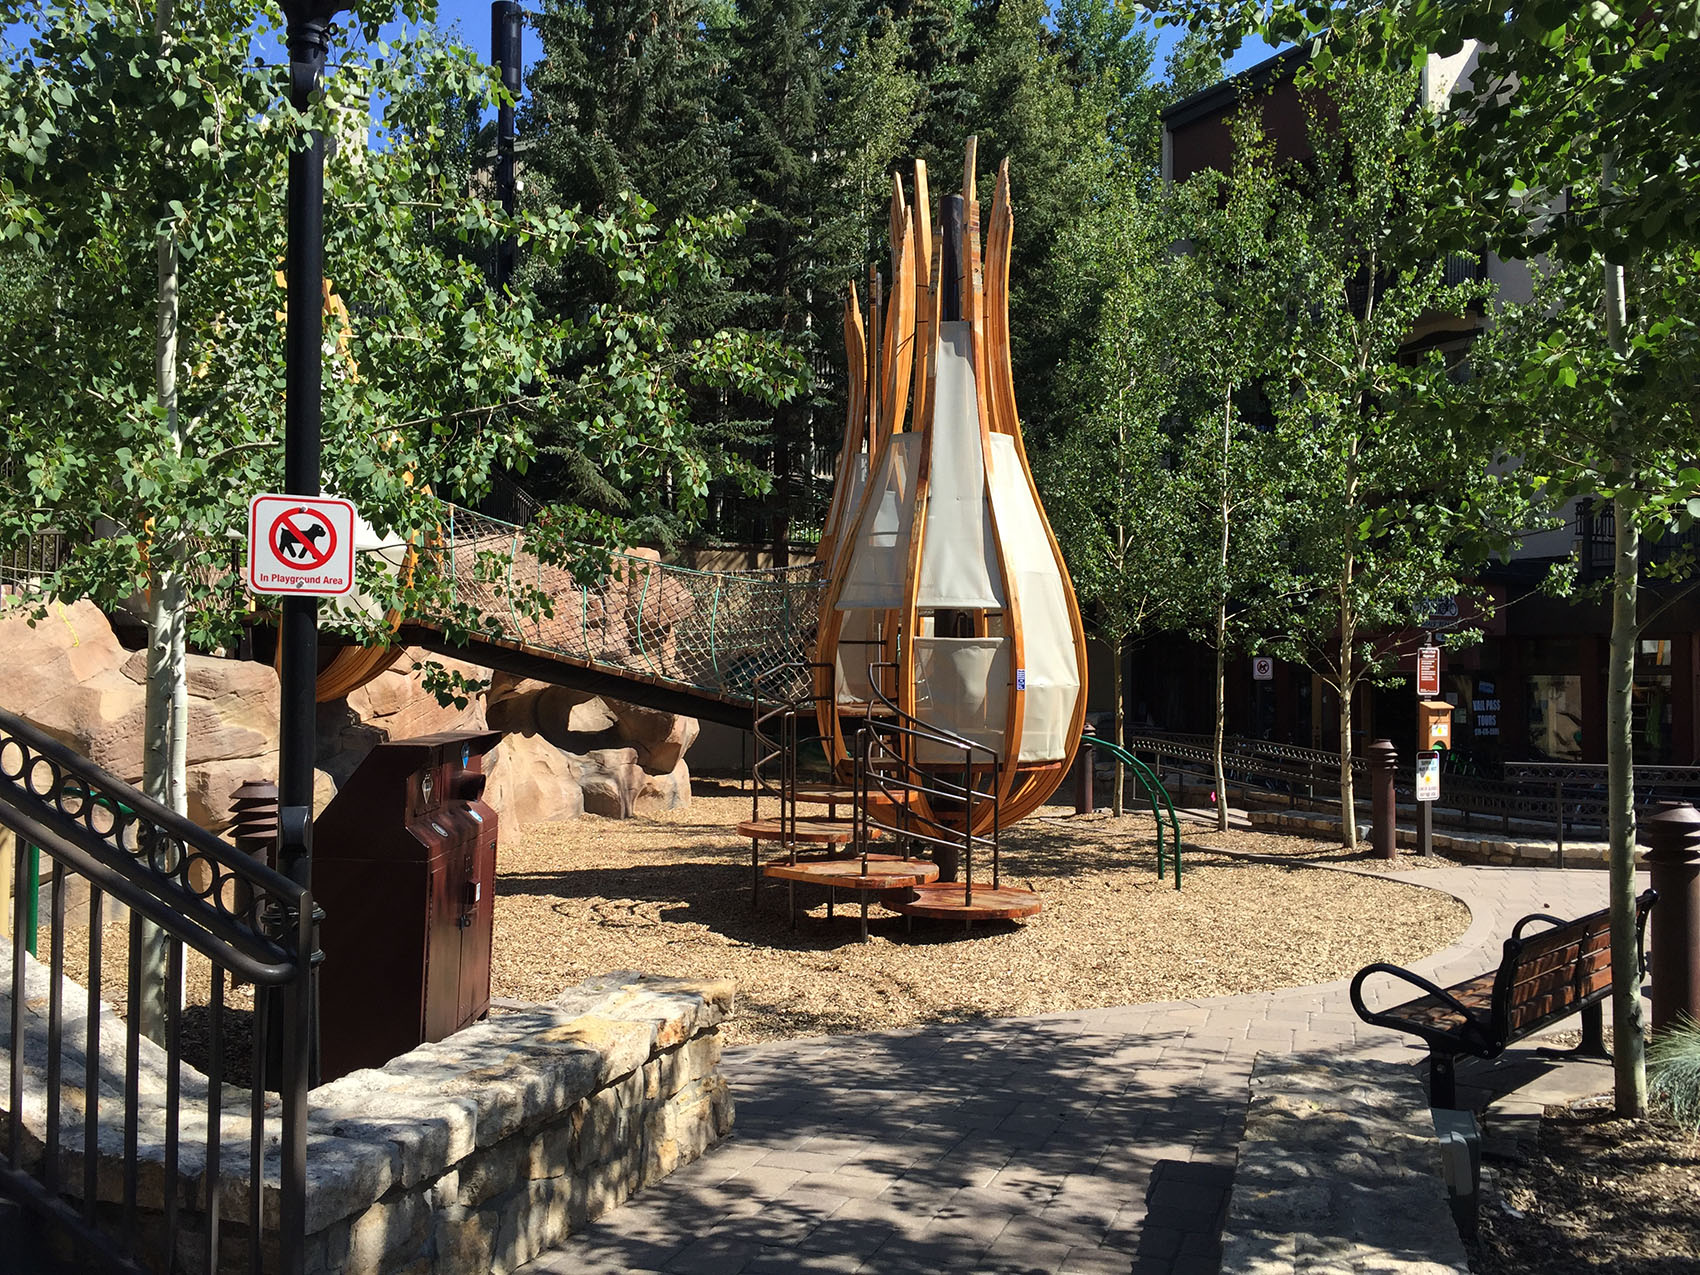 An outdoor playground mimicking a teepee structure, surrounded by trees, with a no smoking sign and benches under a clear sunny sky.